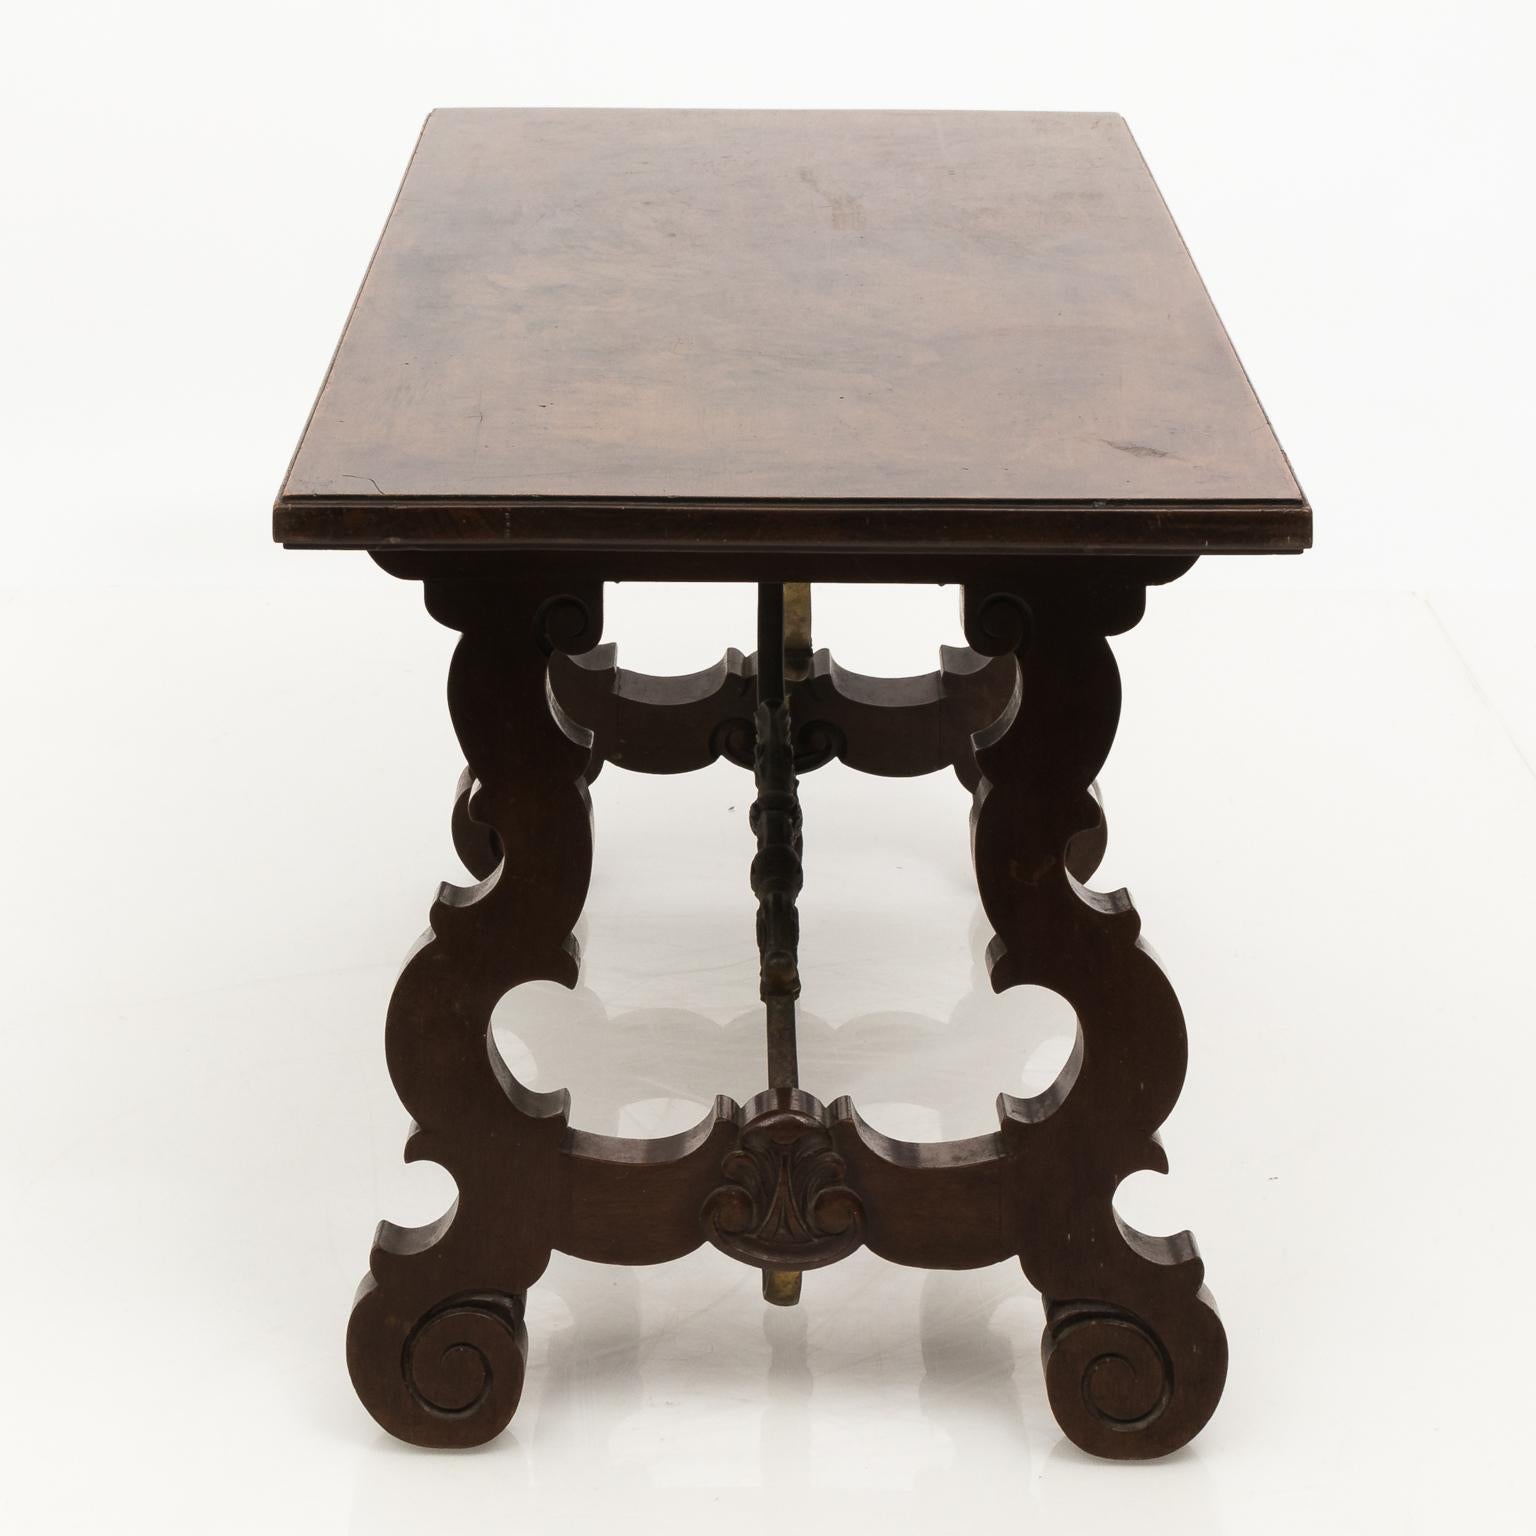 Italian Renaissance Style Walnut and Brass Trestle Coffee Table, circa 1950s For Sale 6